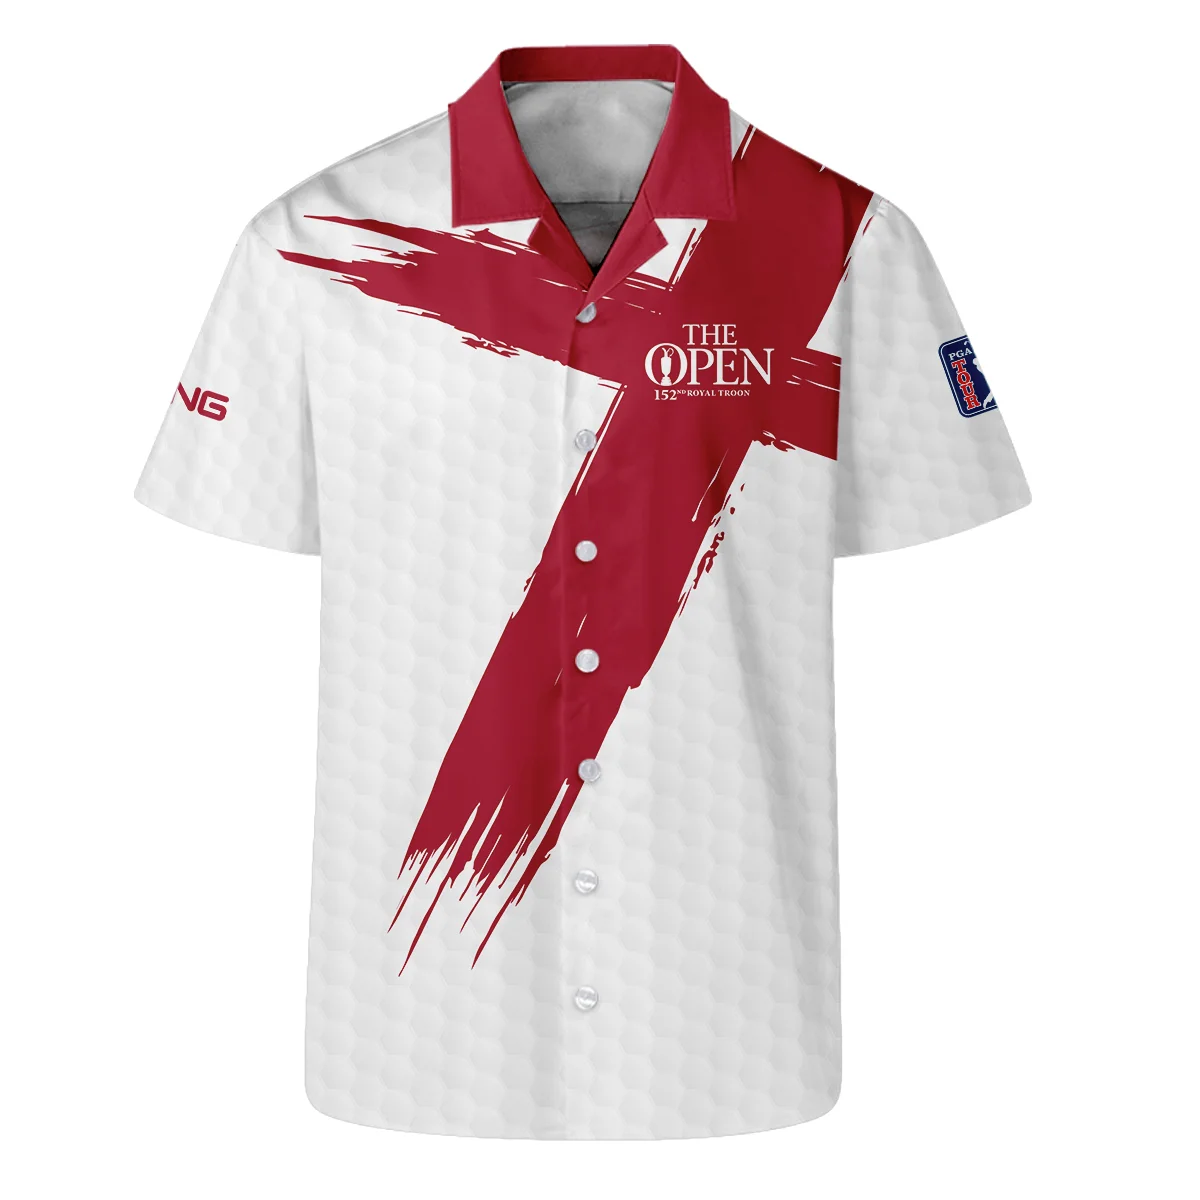 Ping 152nd The Open Championship Golf Sport Polo Shirt Red White Golf Pattern All Over Print Polo Shirt For Men